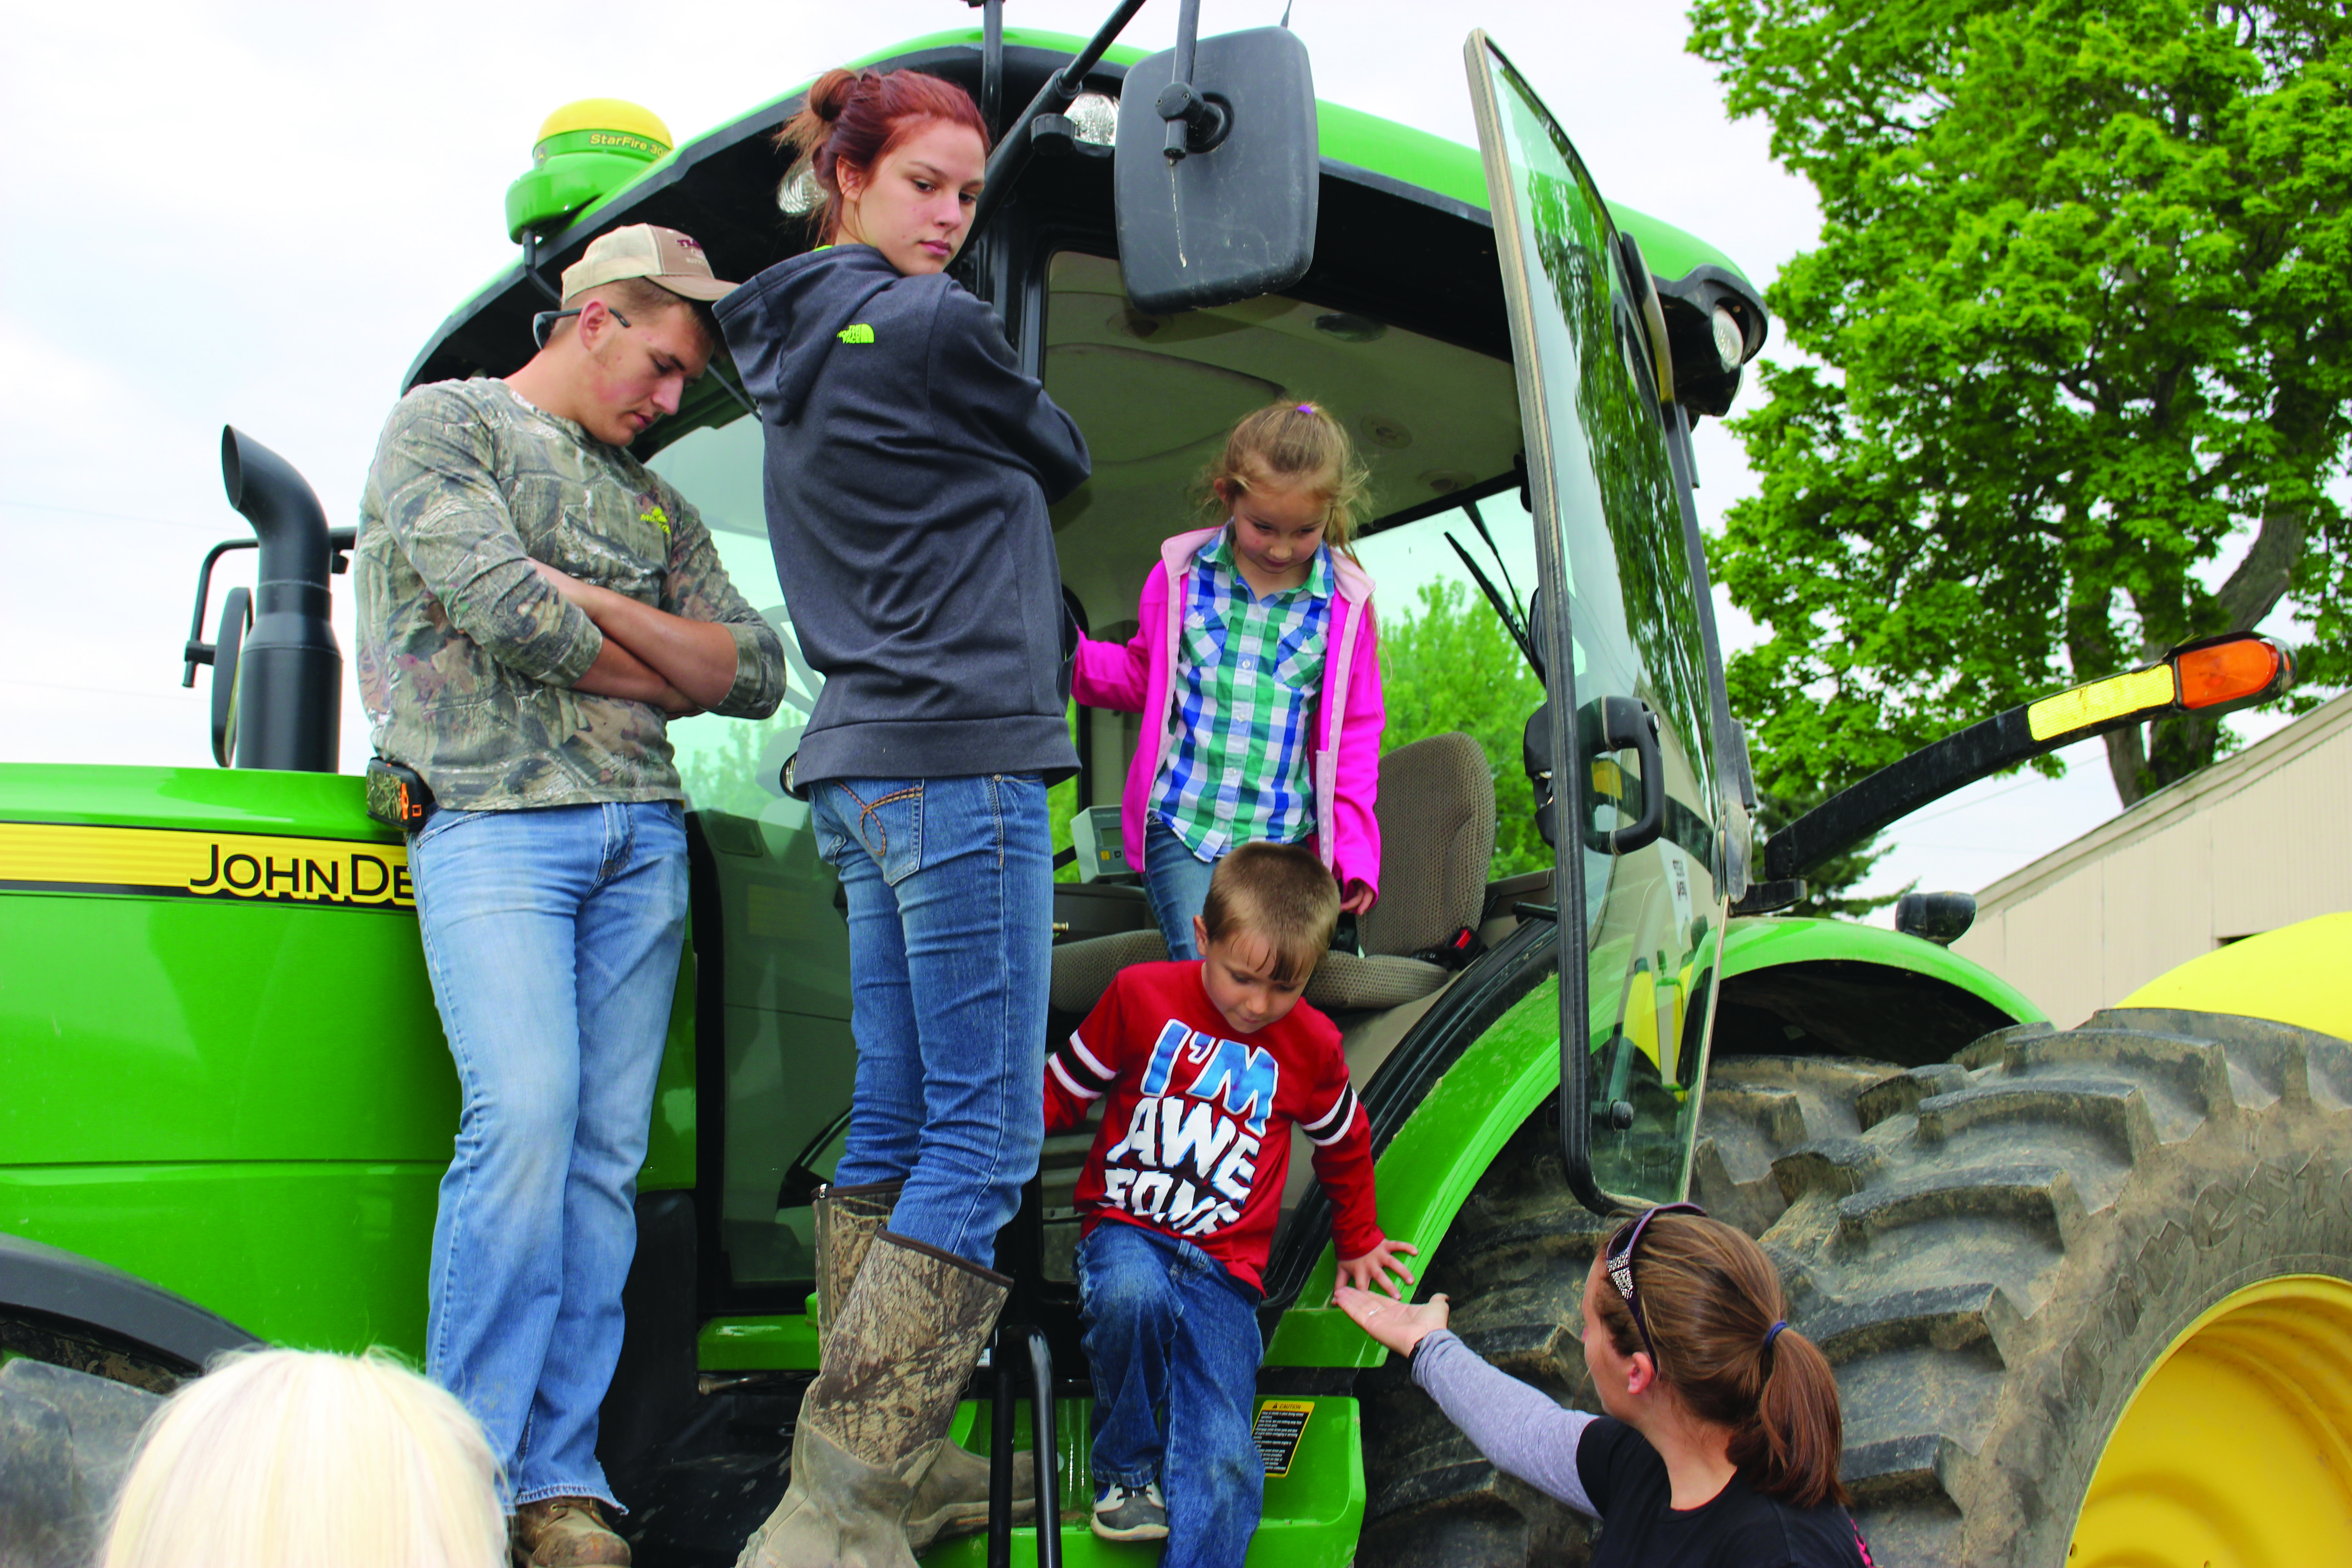 Farm machinery and vehicles were part of the displays for the young students to explore at the CTC Ag Day.  Photo by Patricia Beech.